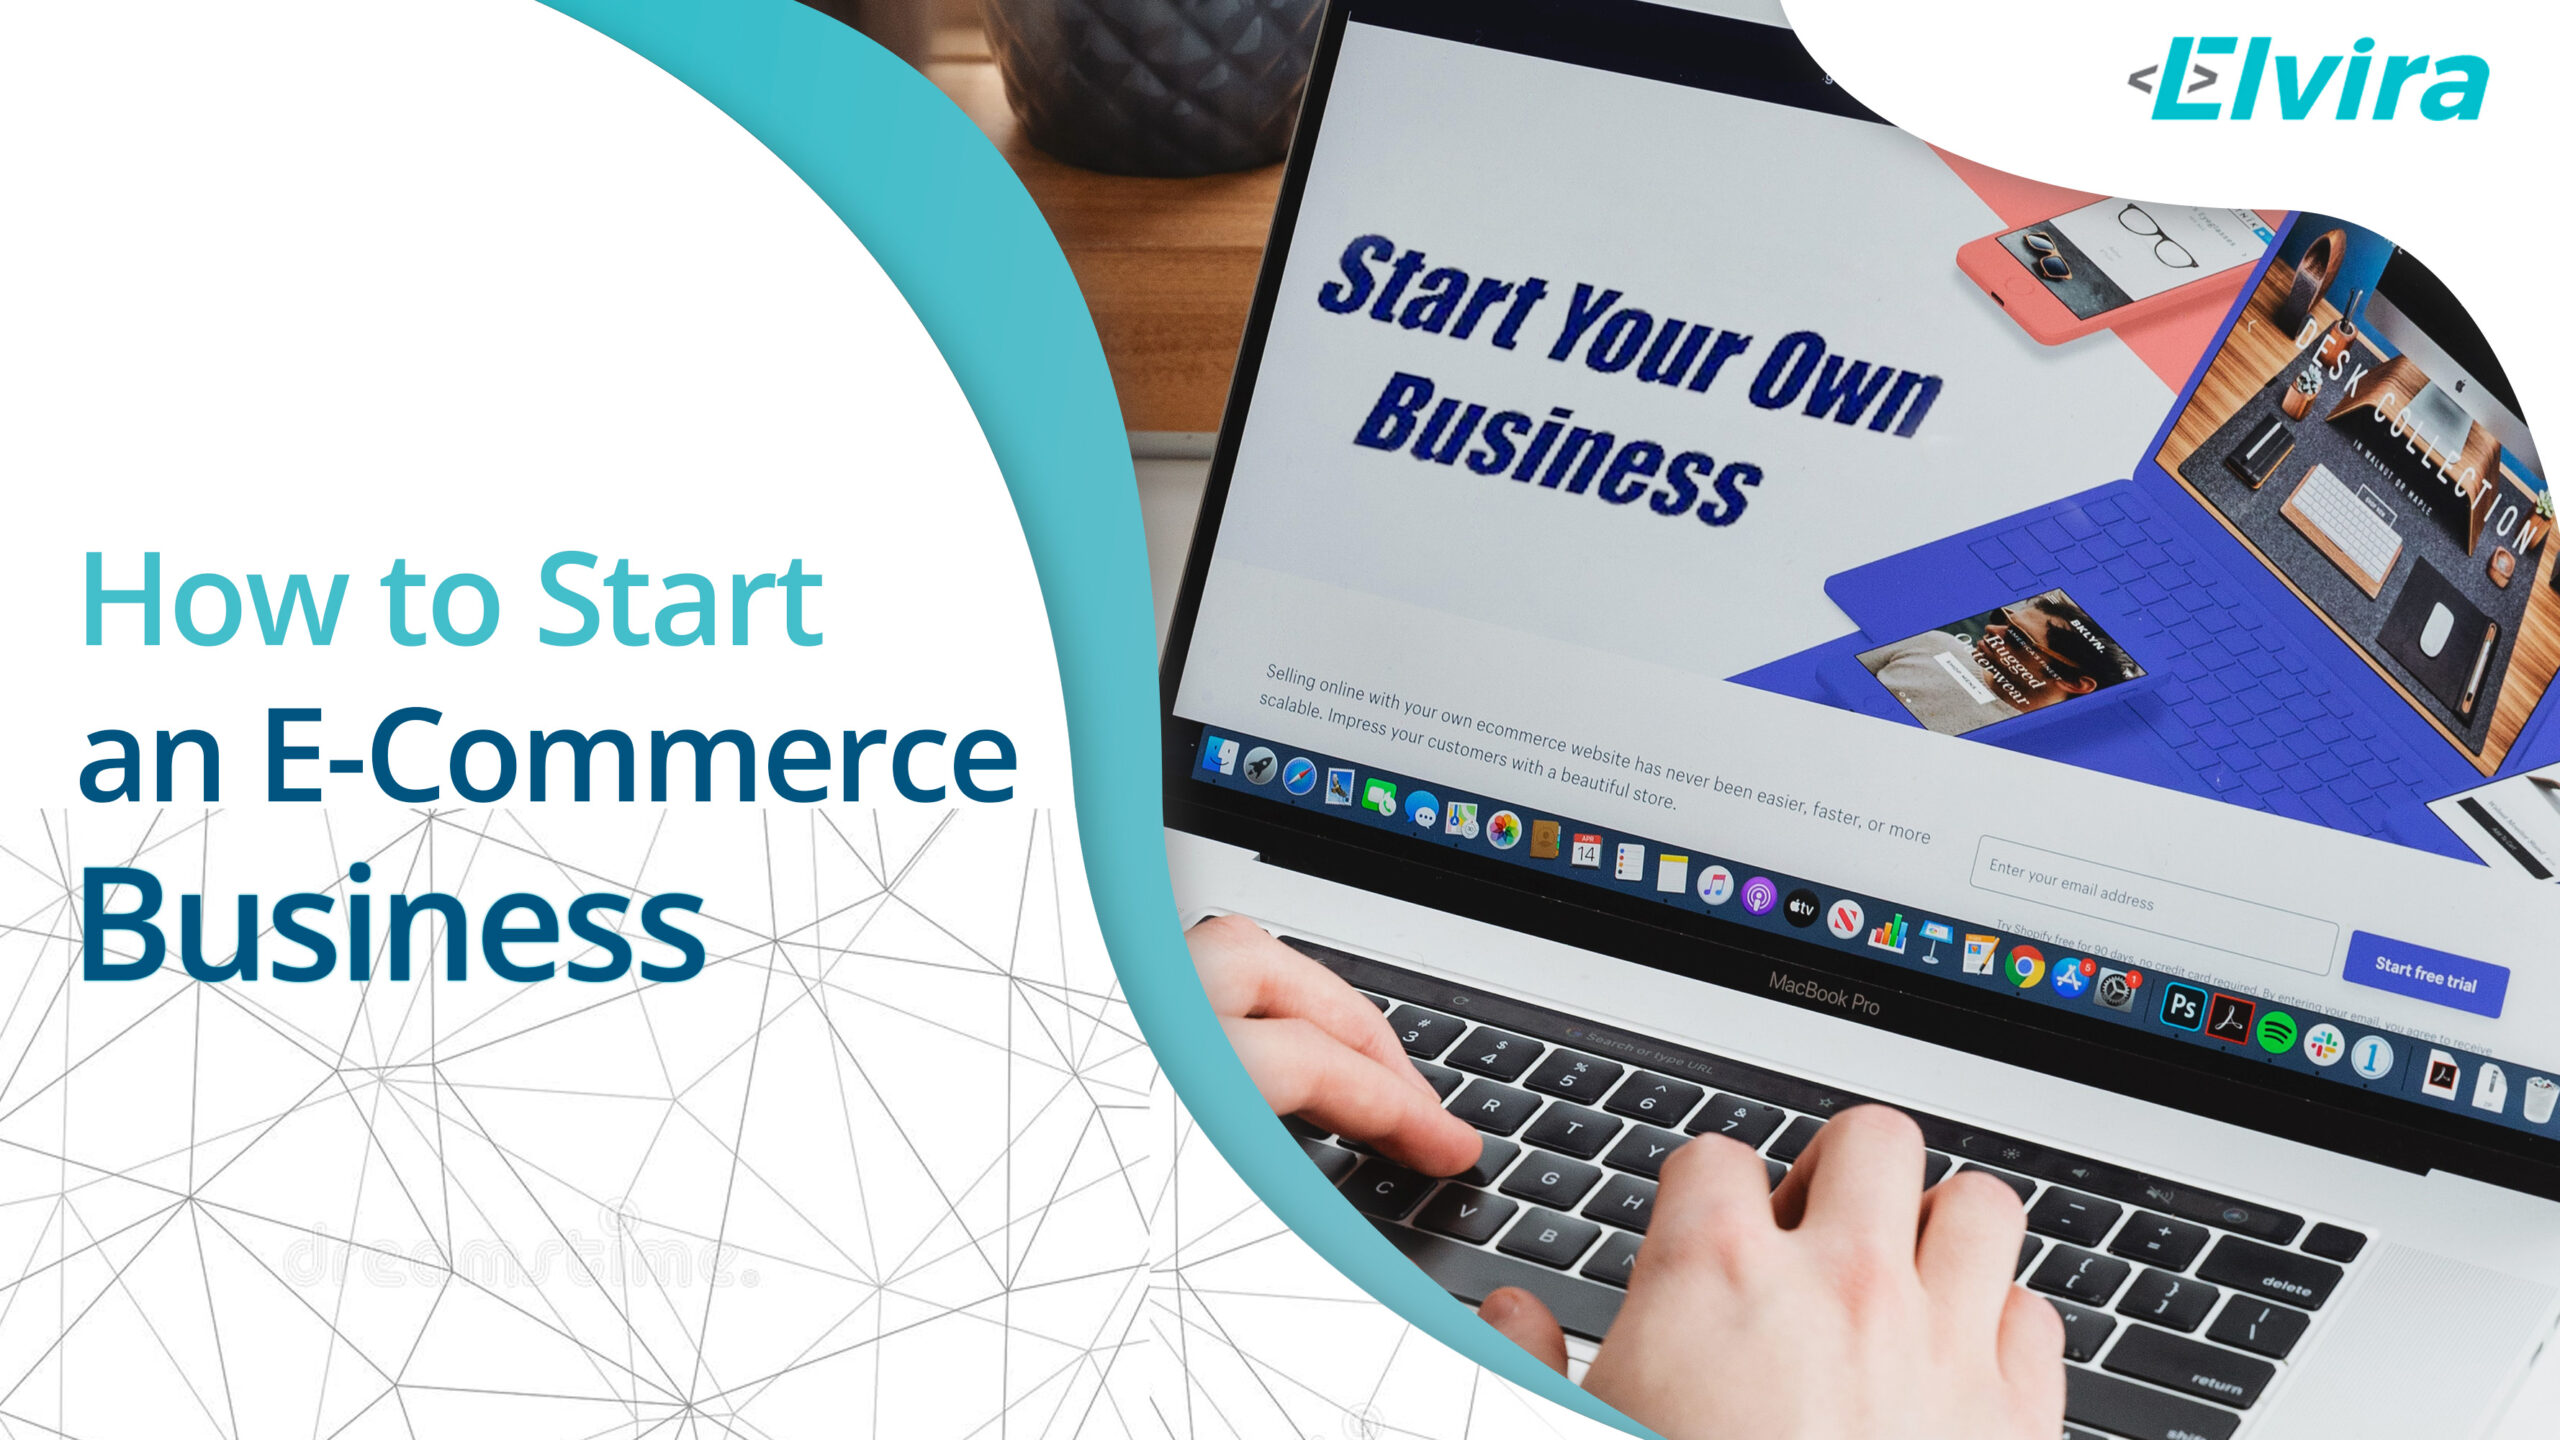 HOW-TO-STAR-E-COMMERCE-BUSINESS